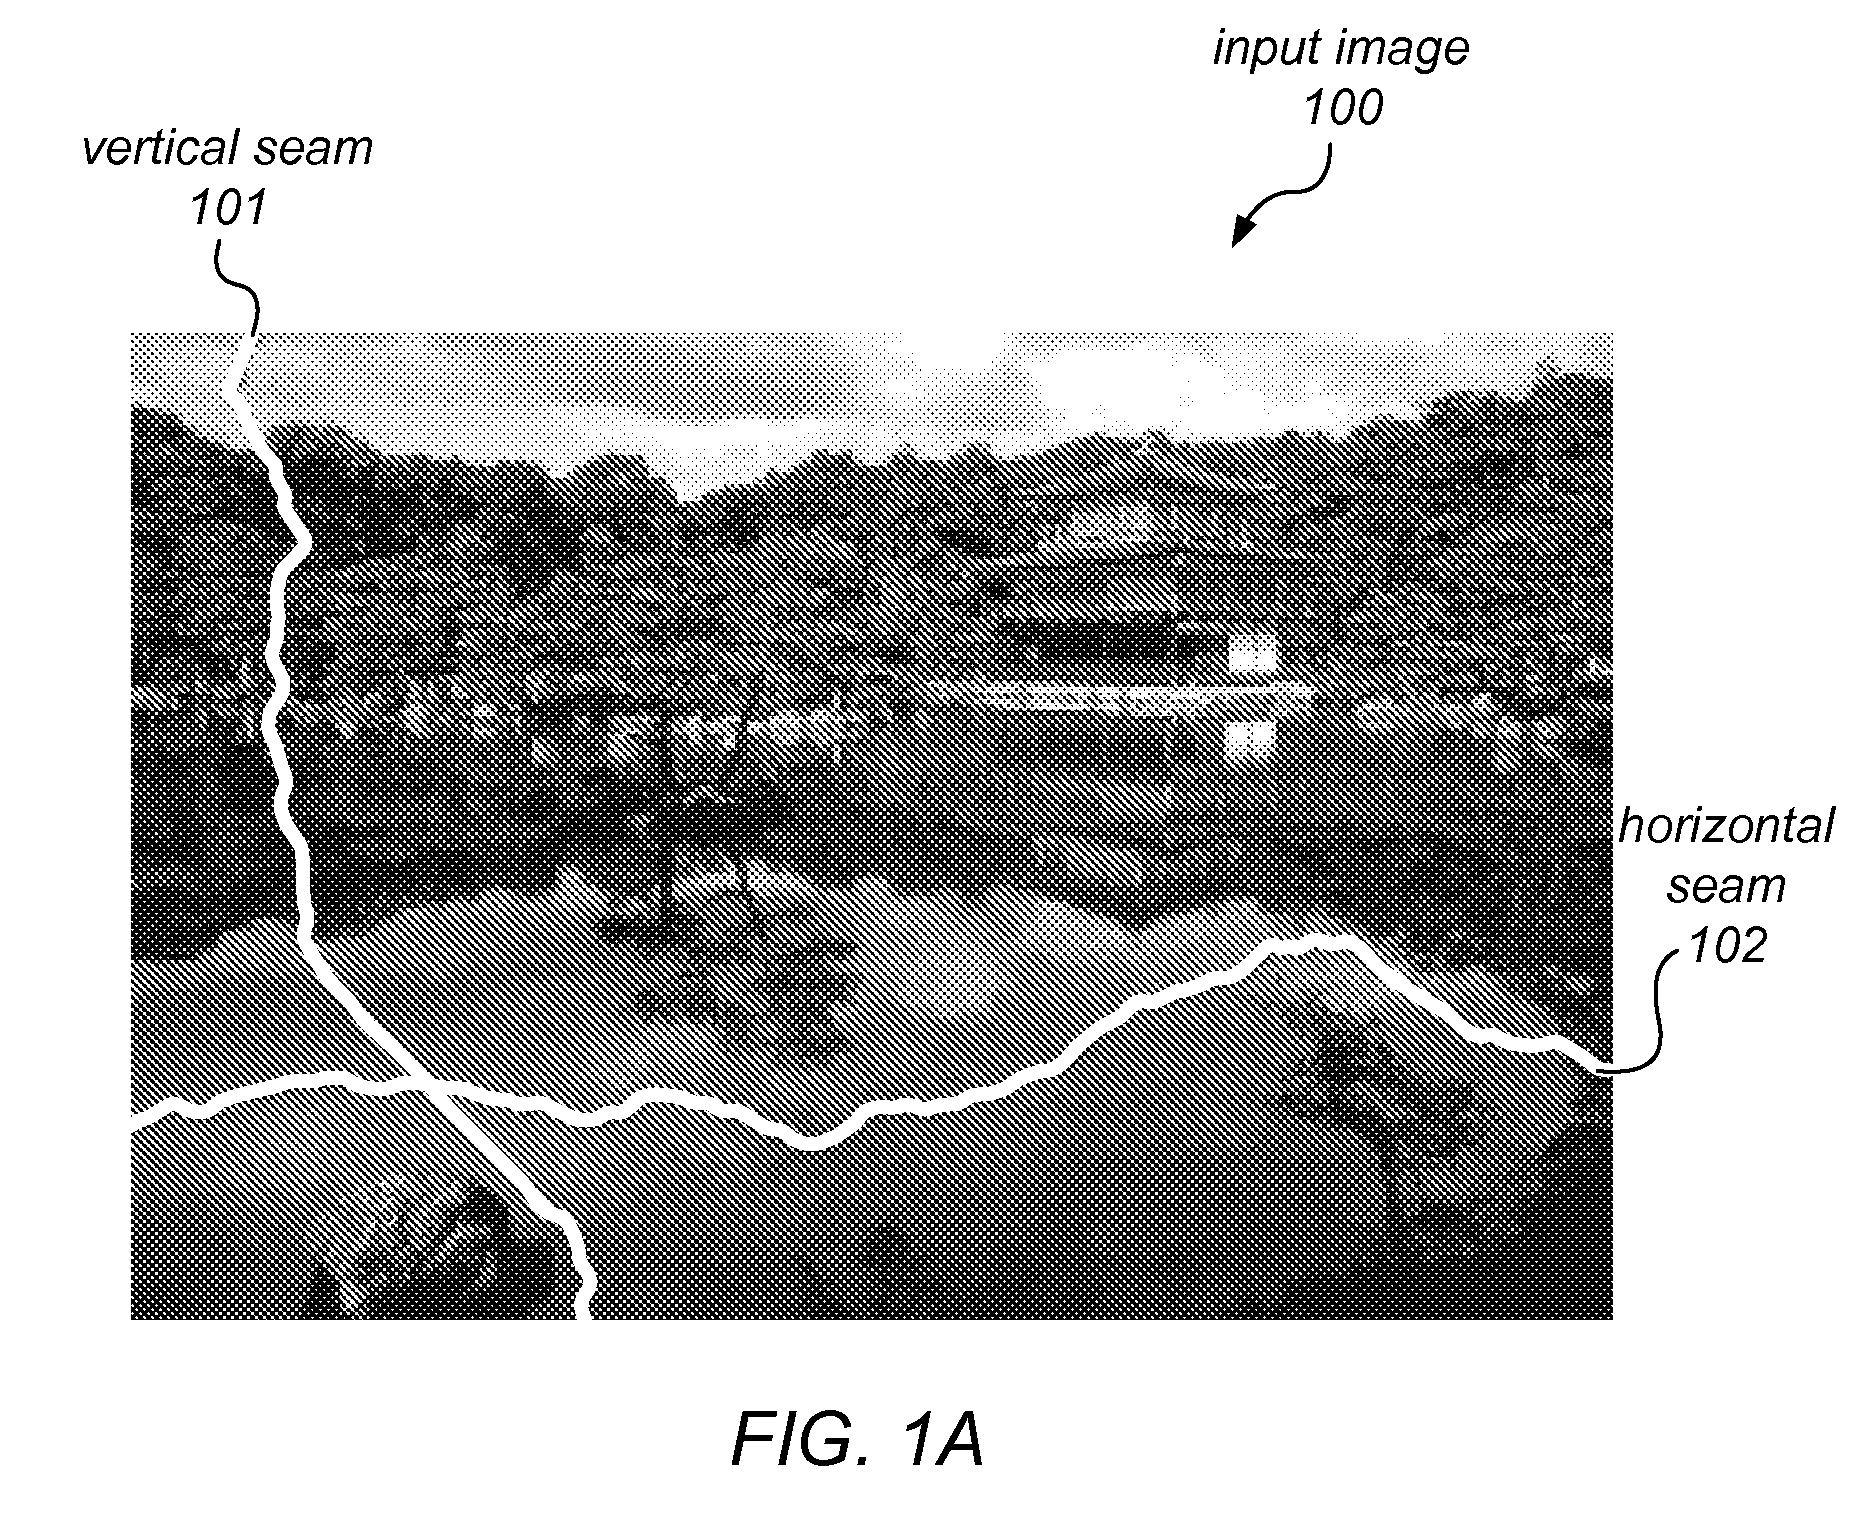 Seam-Based Reduction and Expansion of Images Using Partial Solution Matrix Dependent on Dynamic Programming Access Pattern